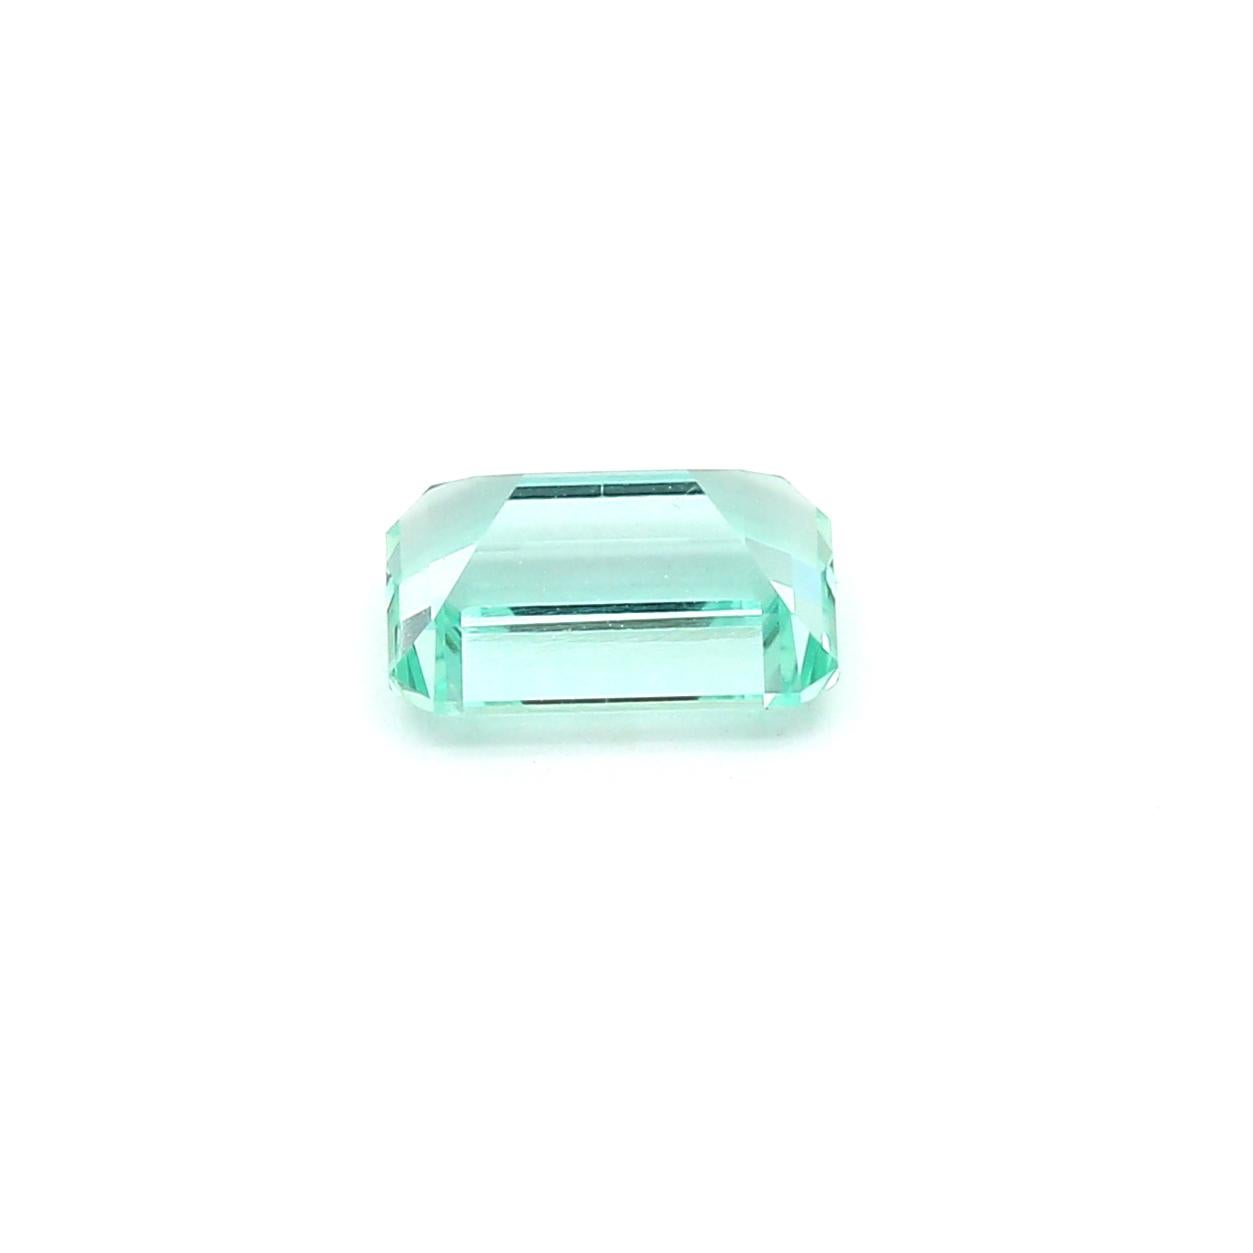 An amazing Russian Emerald which allows jewelers to create a unique piece of wearable art.
This exceptional quality gemstone would make a custom-made jewelry design. Perfect for a Ring or Pendant.

Shape - Octagon
Weight - 1.3 ct
Treatment -